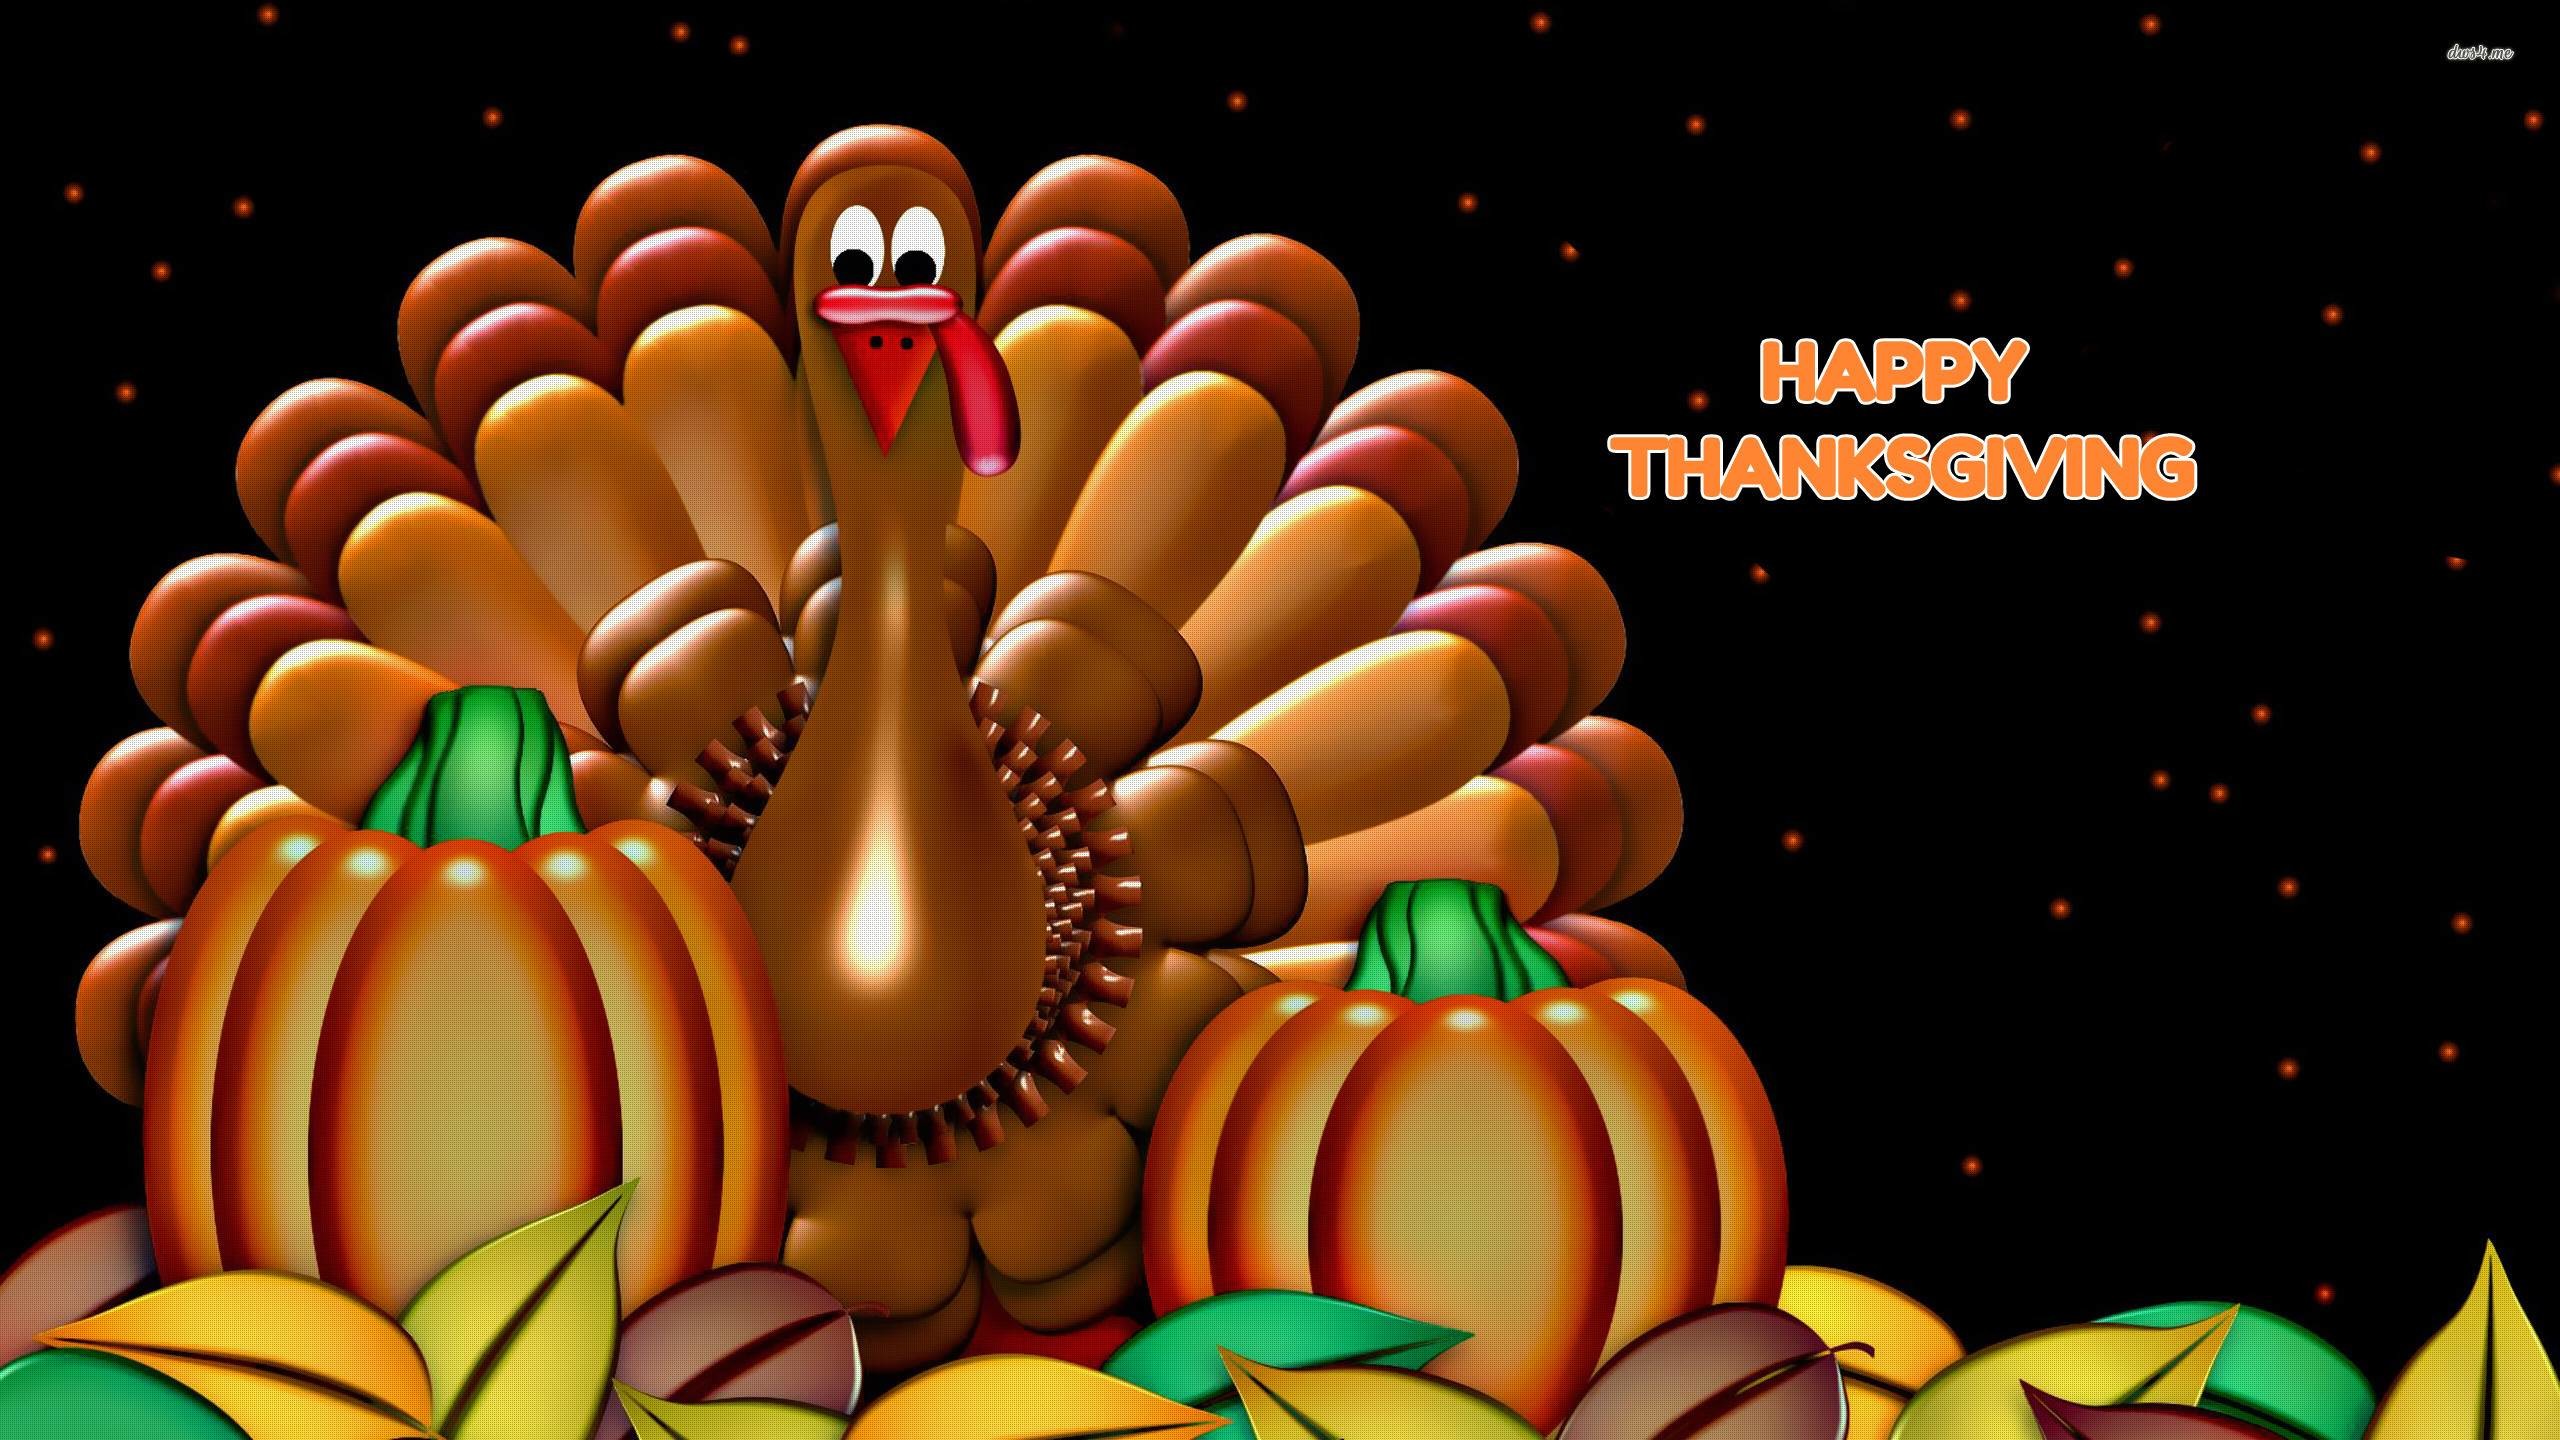 Thanksgiving Images Wallpaper (73+ images)